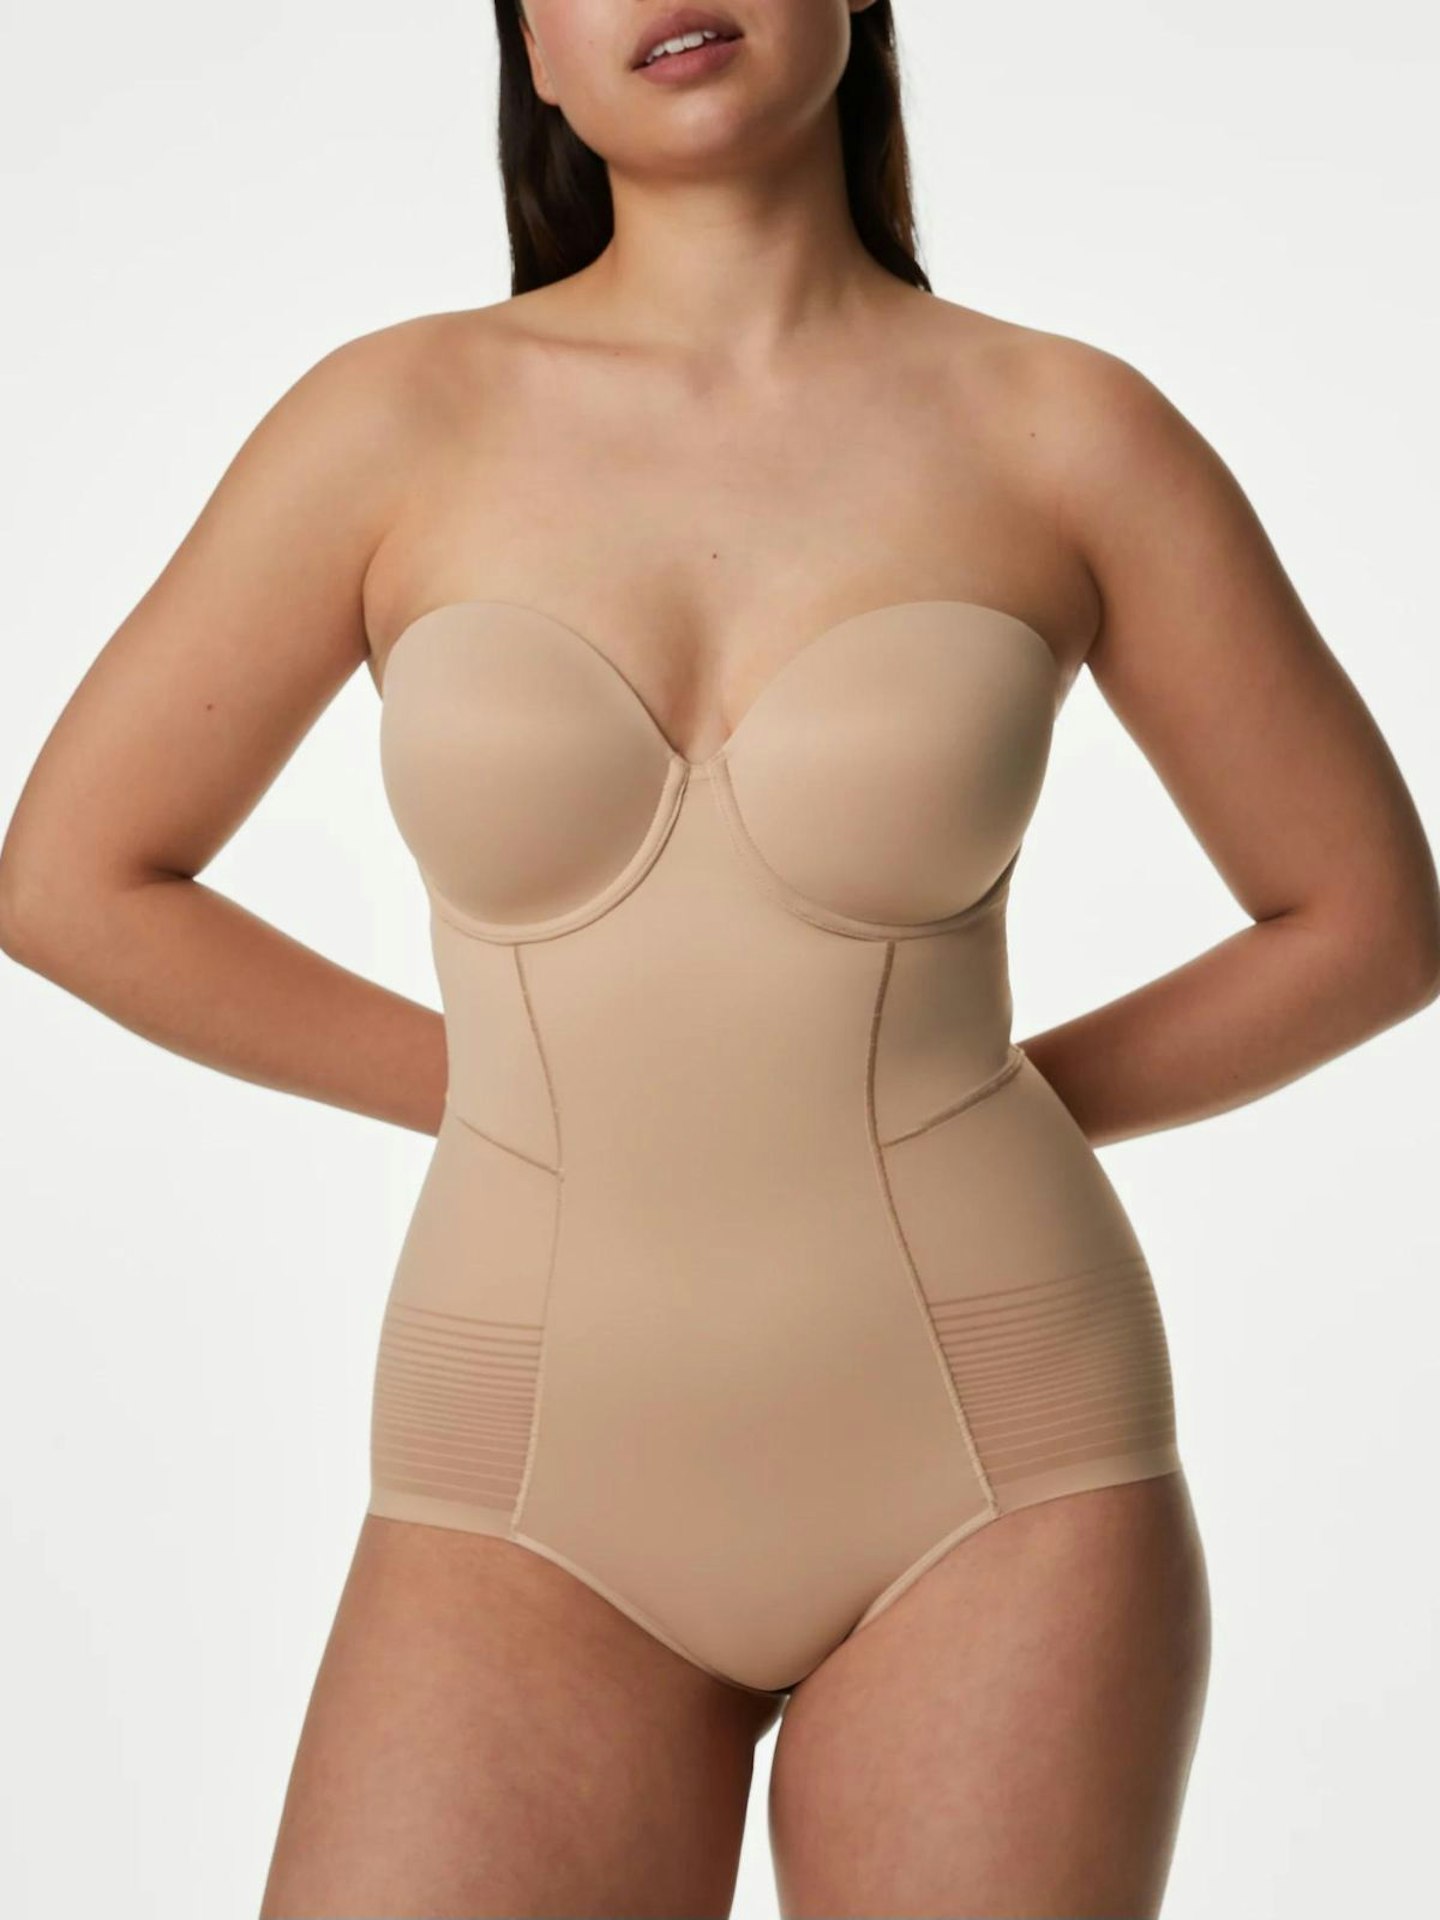 A supportive strapless shapewear bodysuit for only $30?! 🙌🏼 this